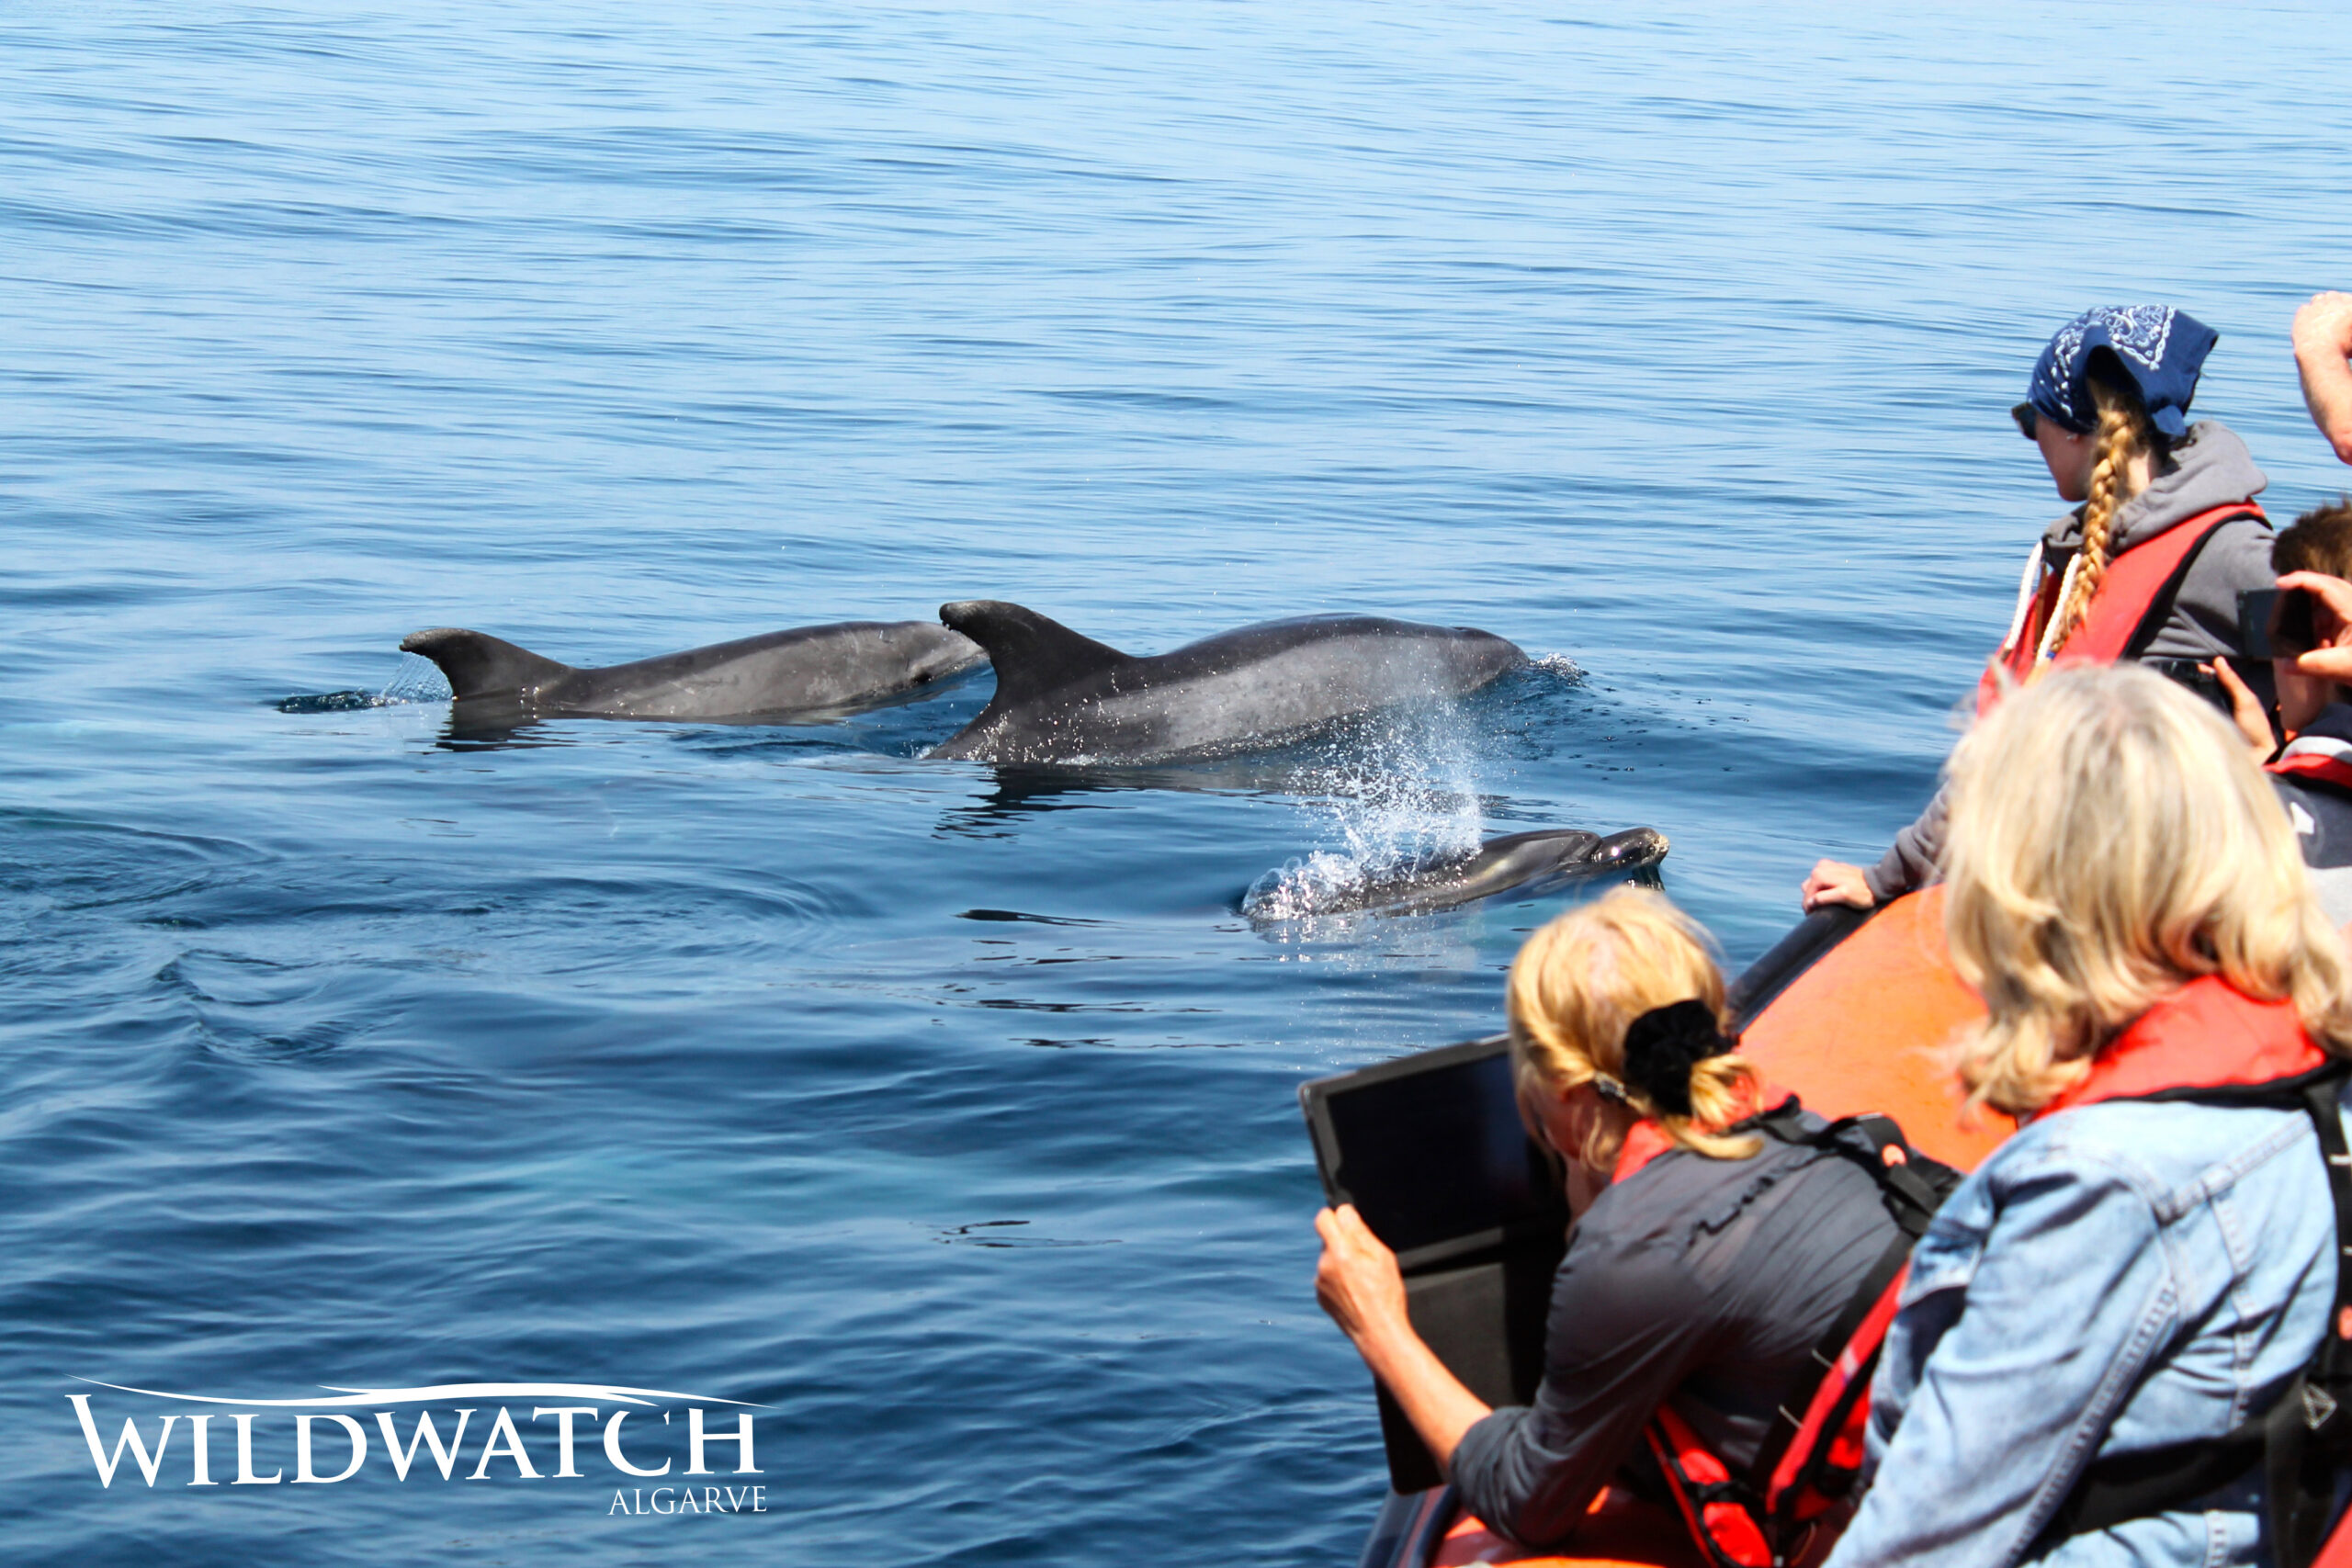 Dolphins Wildwatch